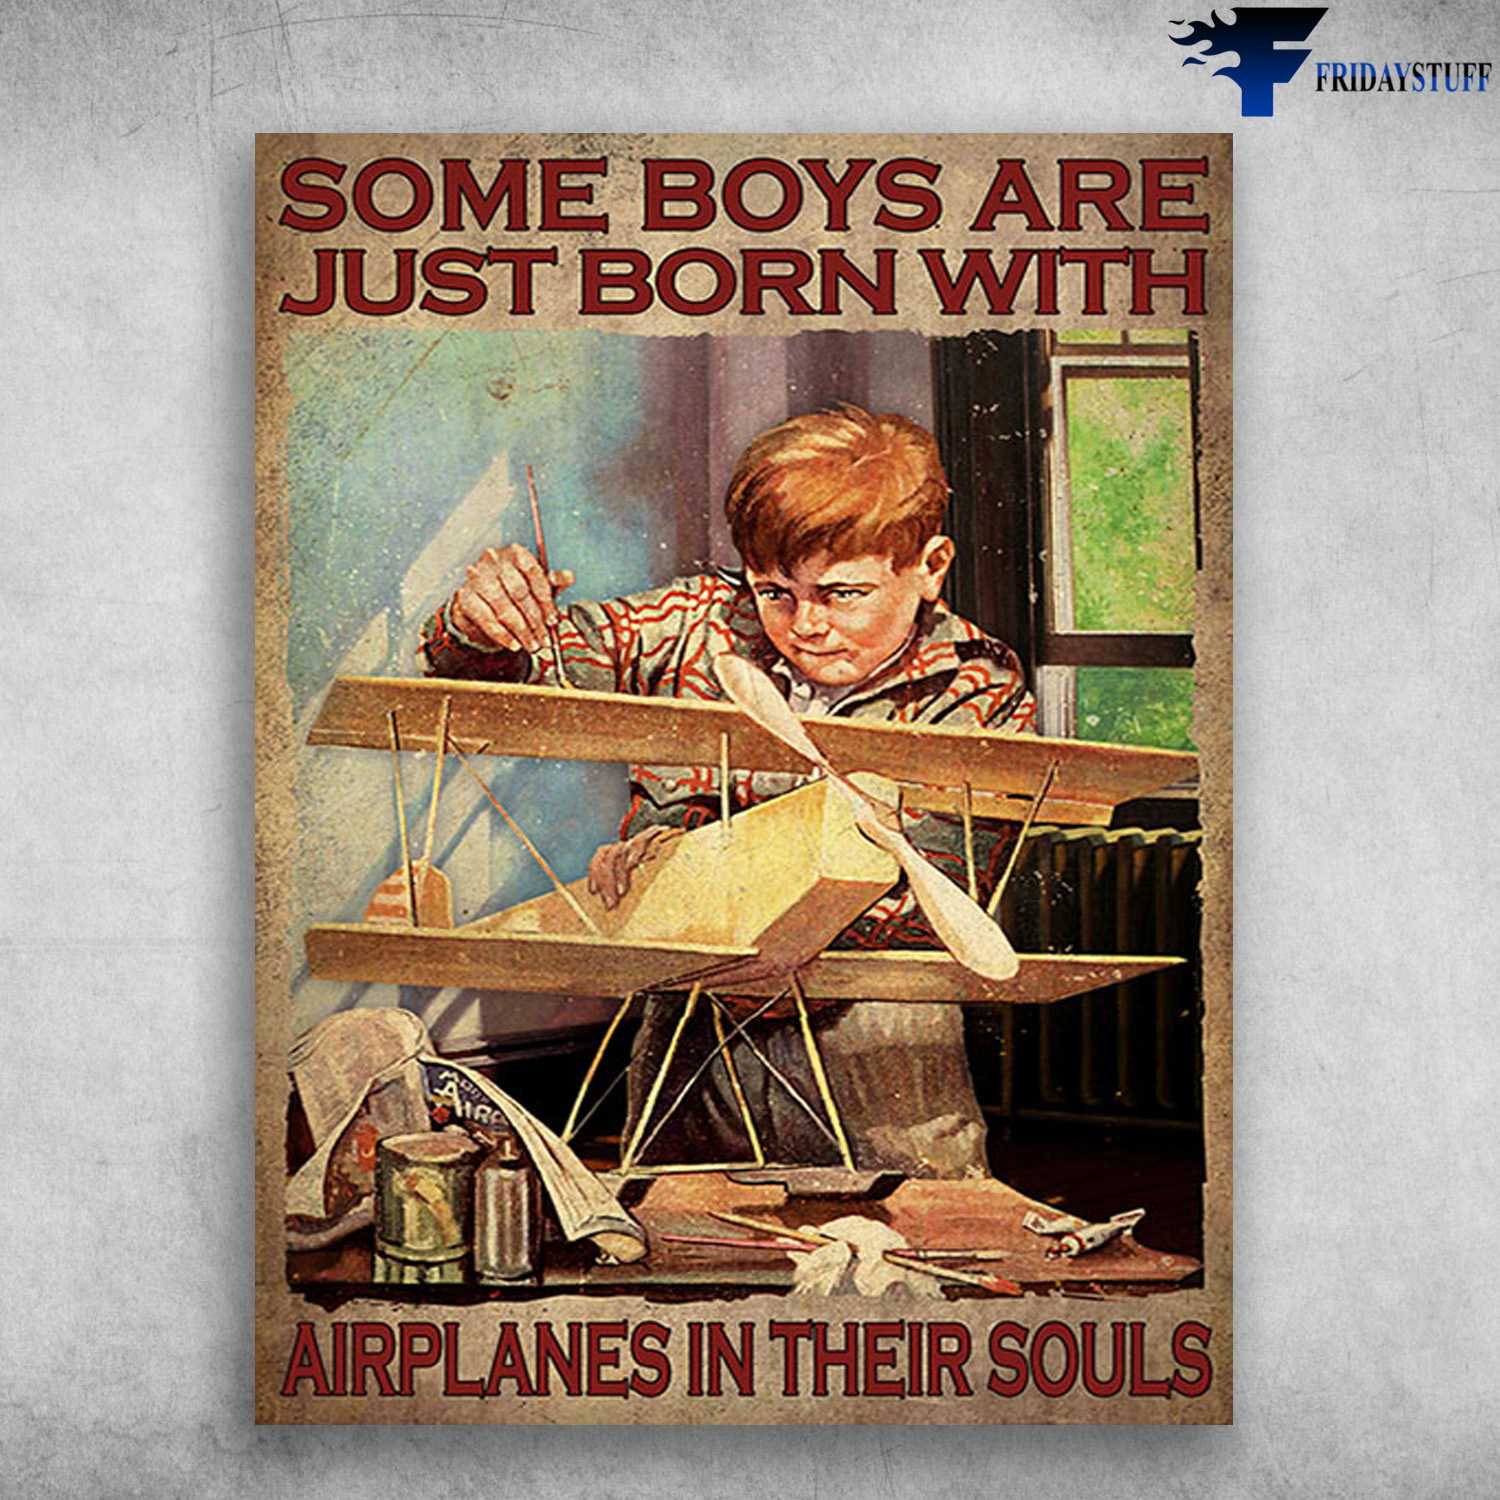 Airplanes Boy, Airplane Poster - Some Boys Are Just Born With, Airplanes In Their Souls